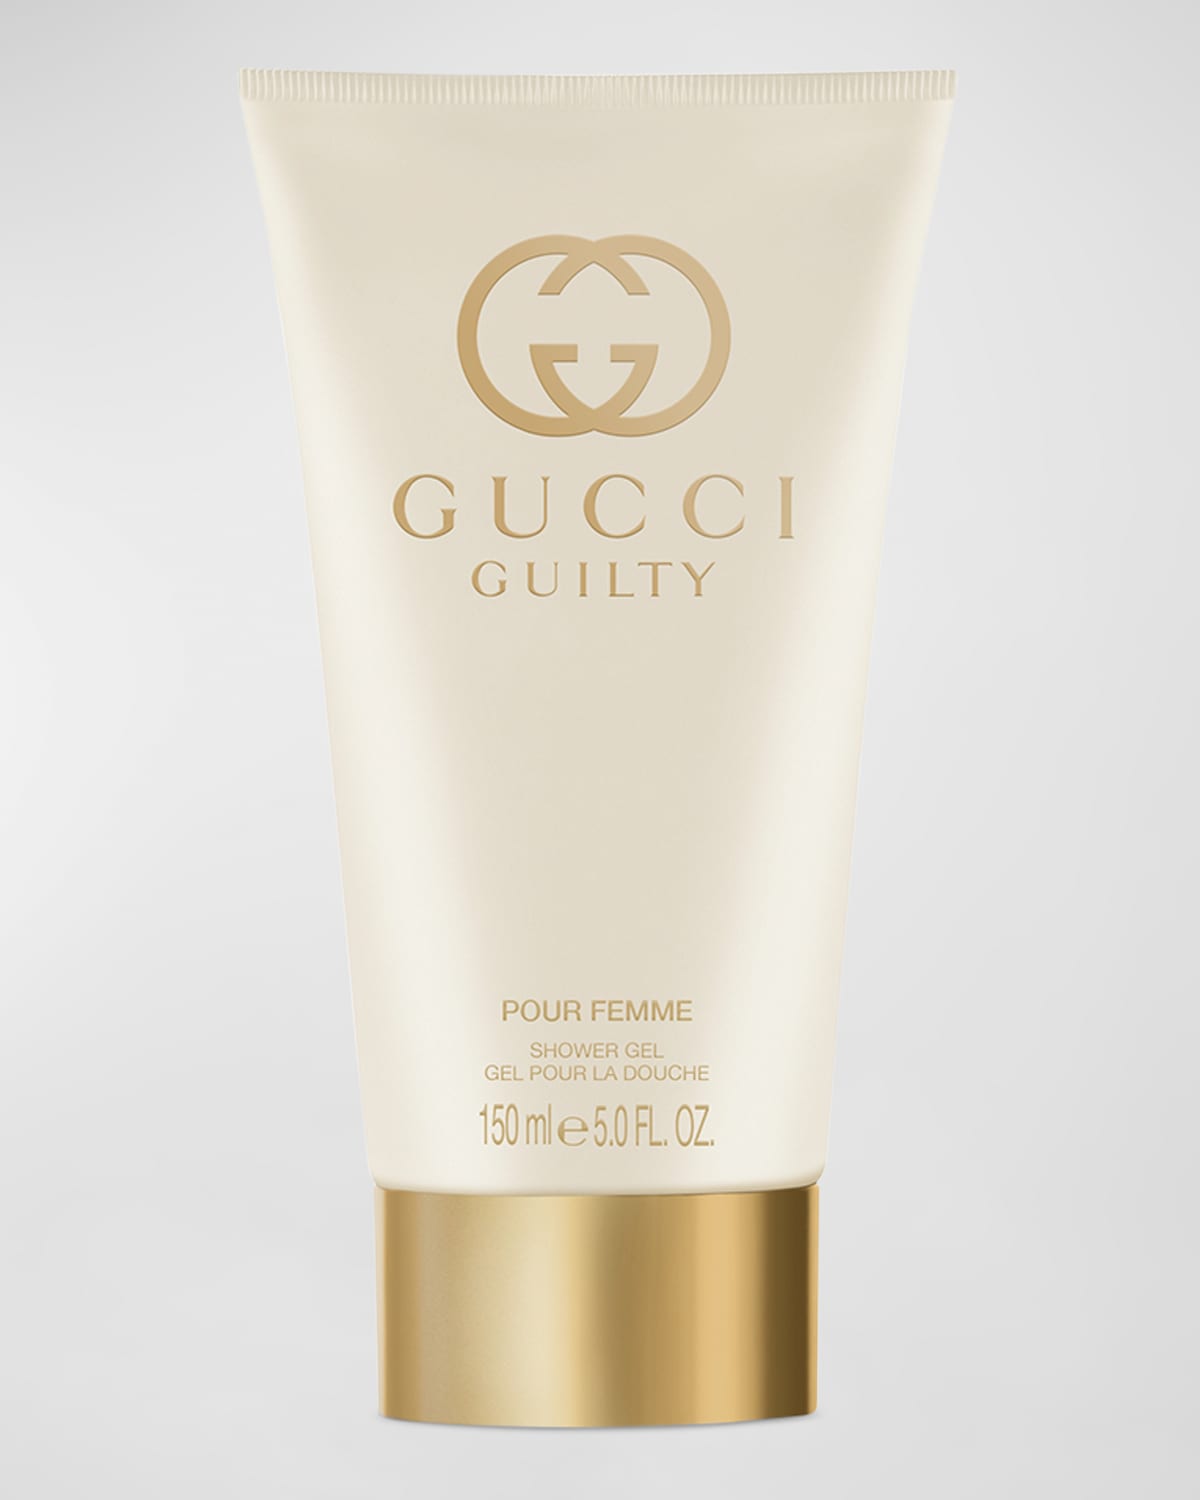 Gucci Guilty Shower Gel For Her, 5 Oz. In White